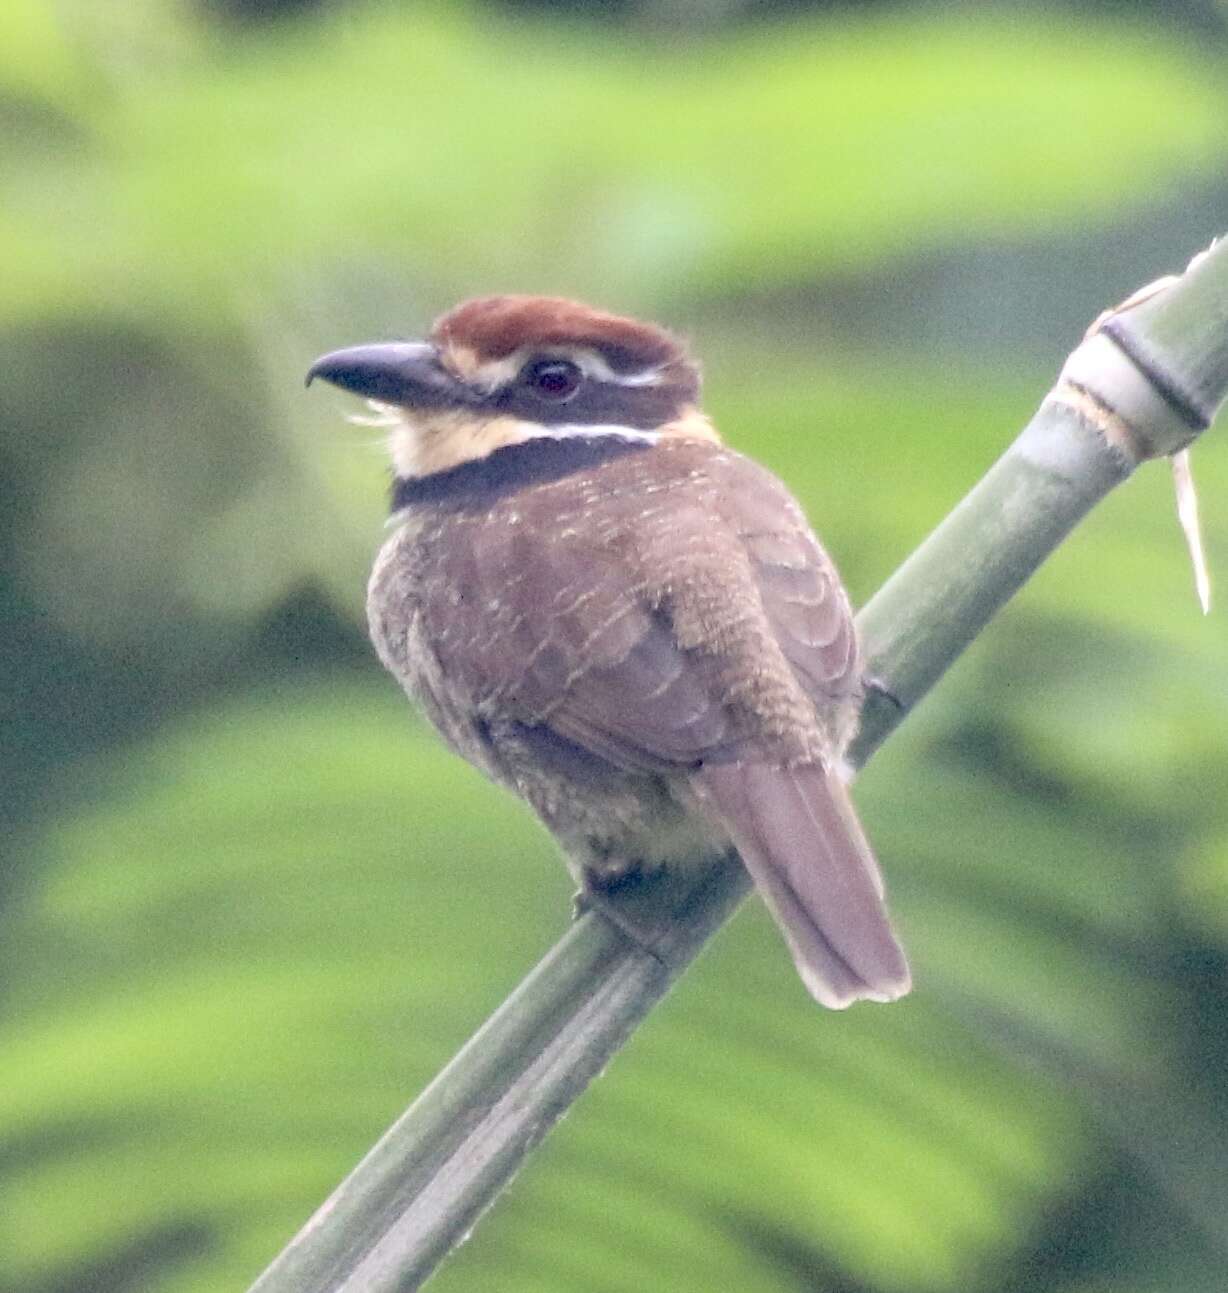 Image of Chestnut-capped Puffbird